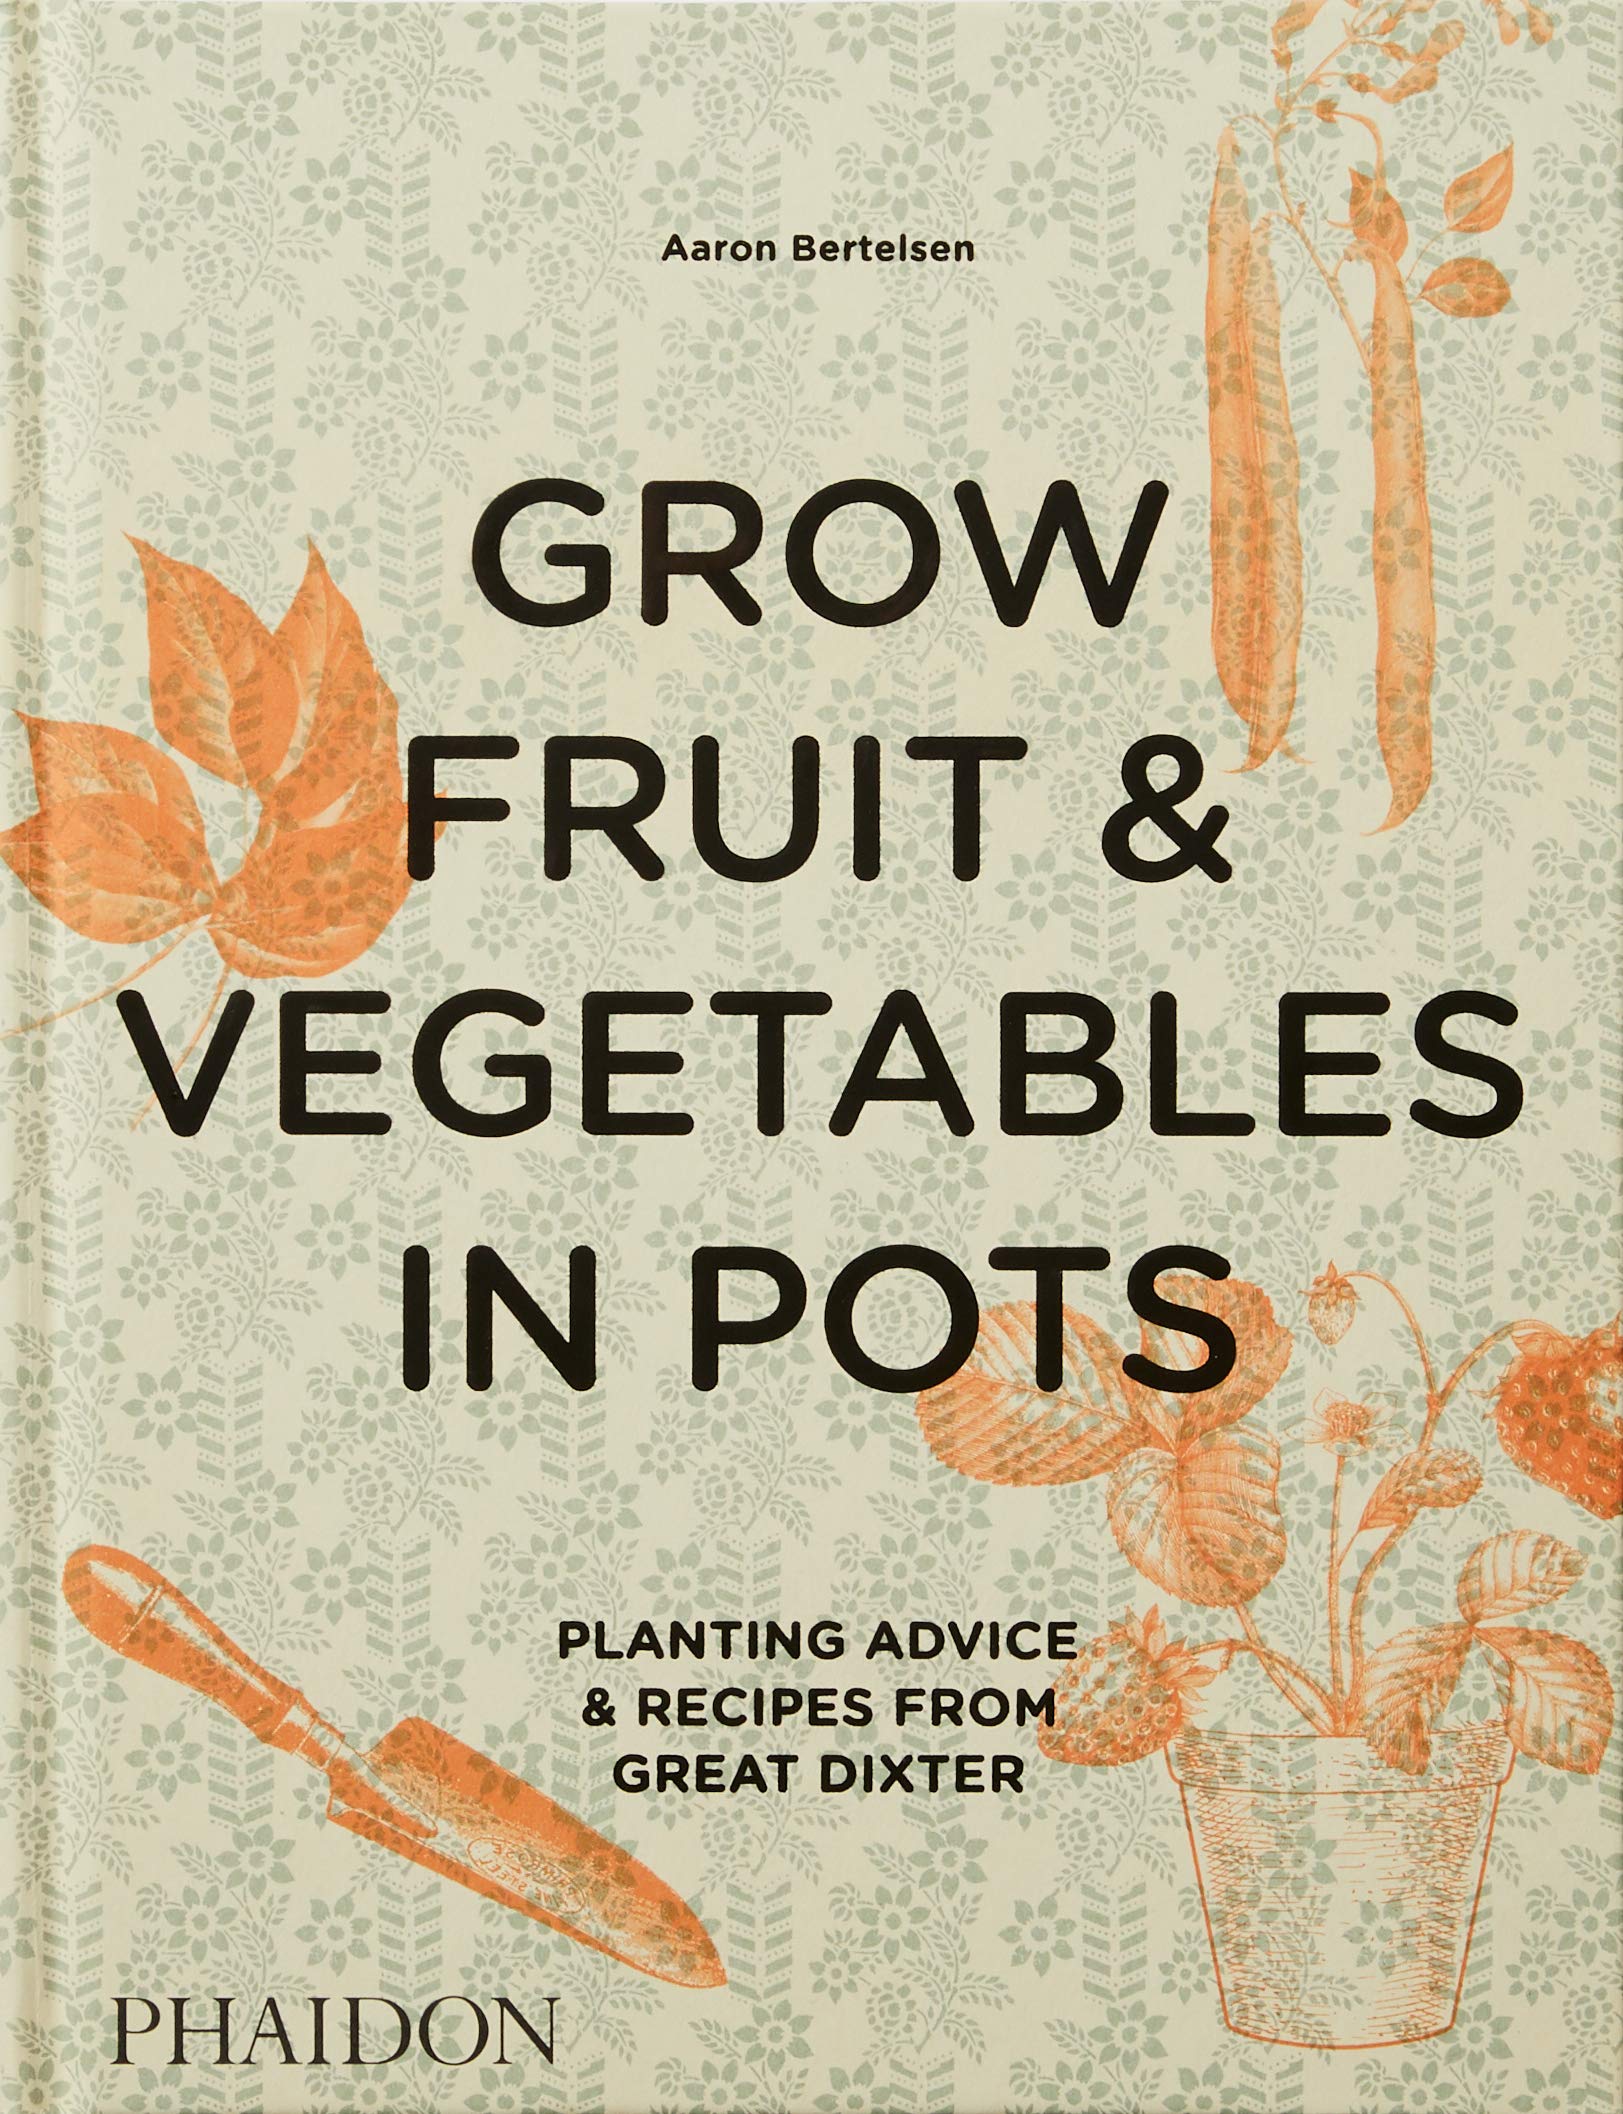 Grow Fruit and Vegetables in Pots